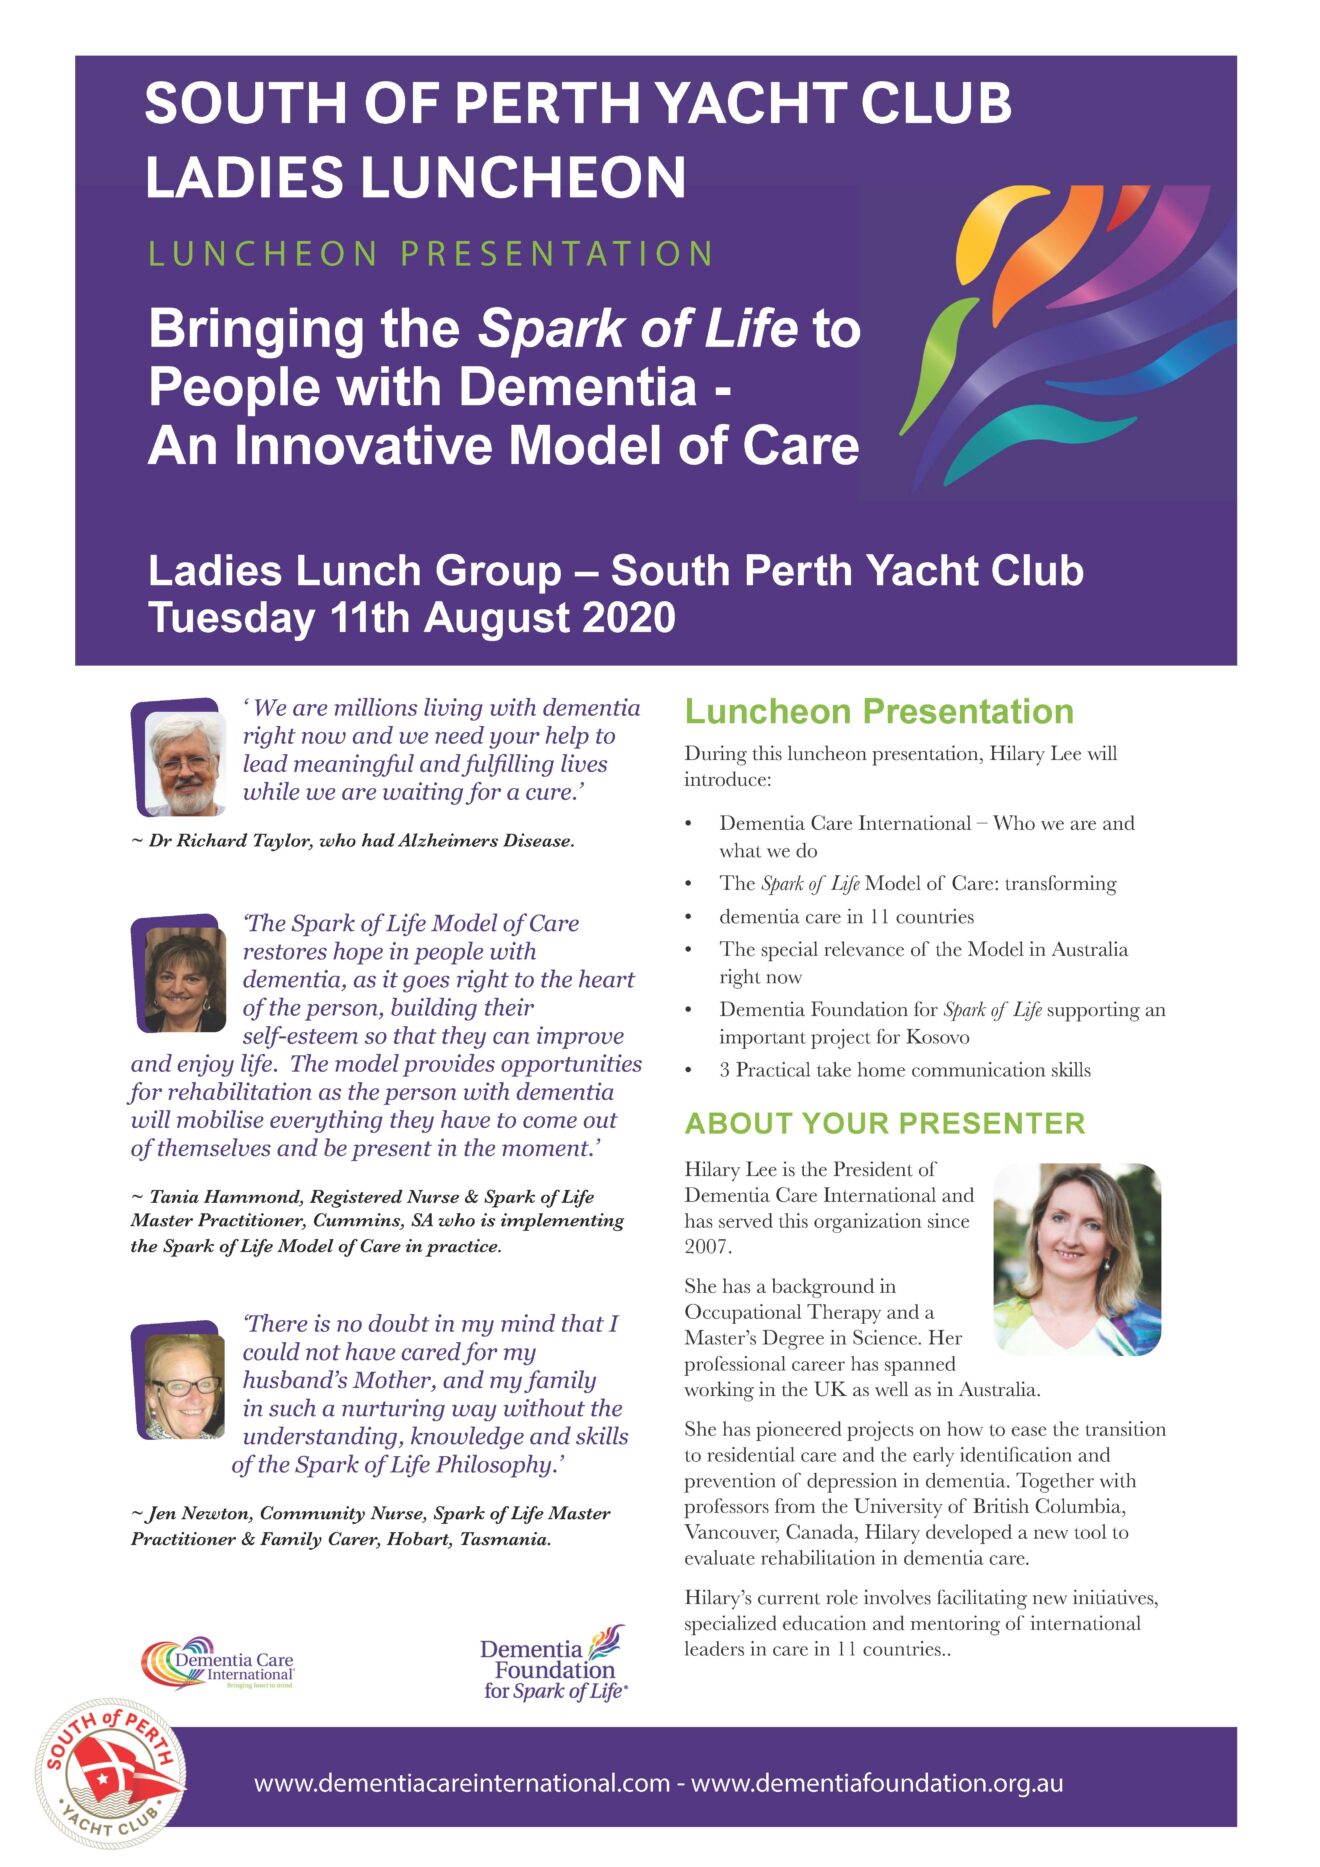 Book now for our next Ladies Luncheon on 11 August